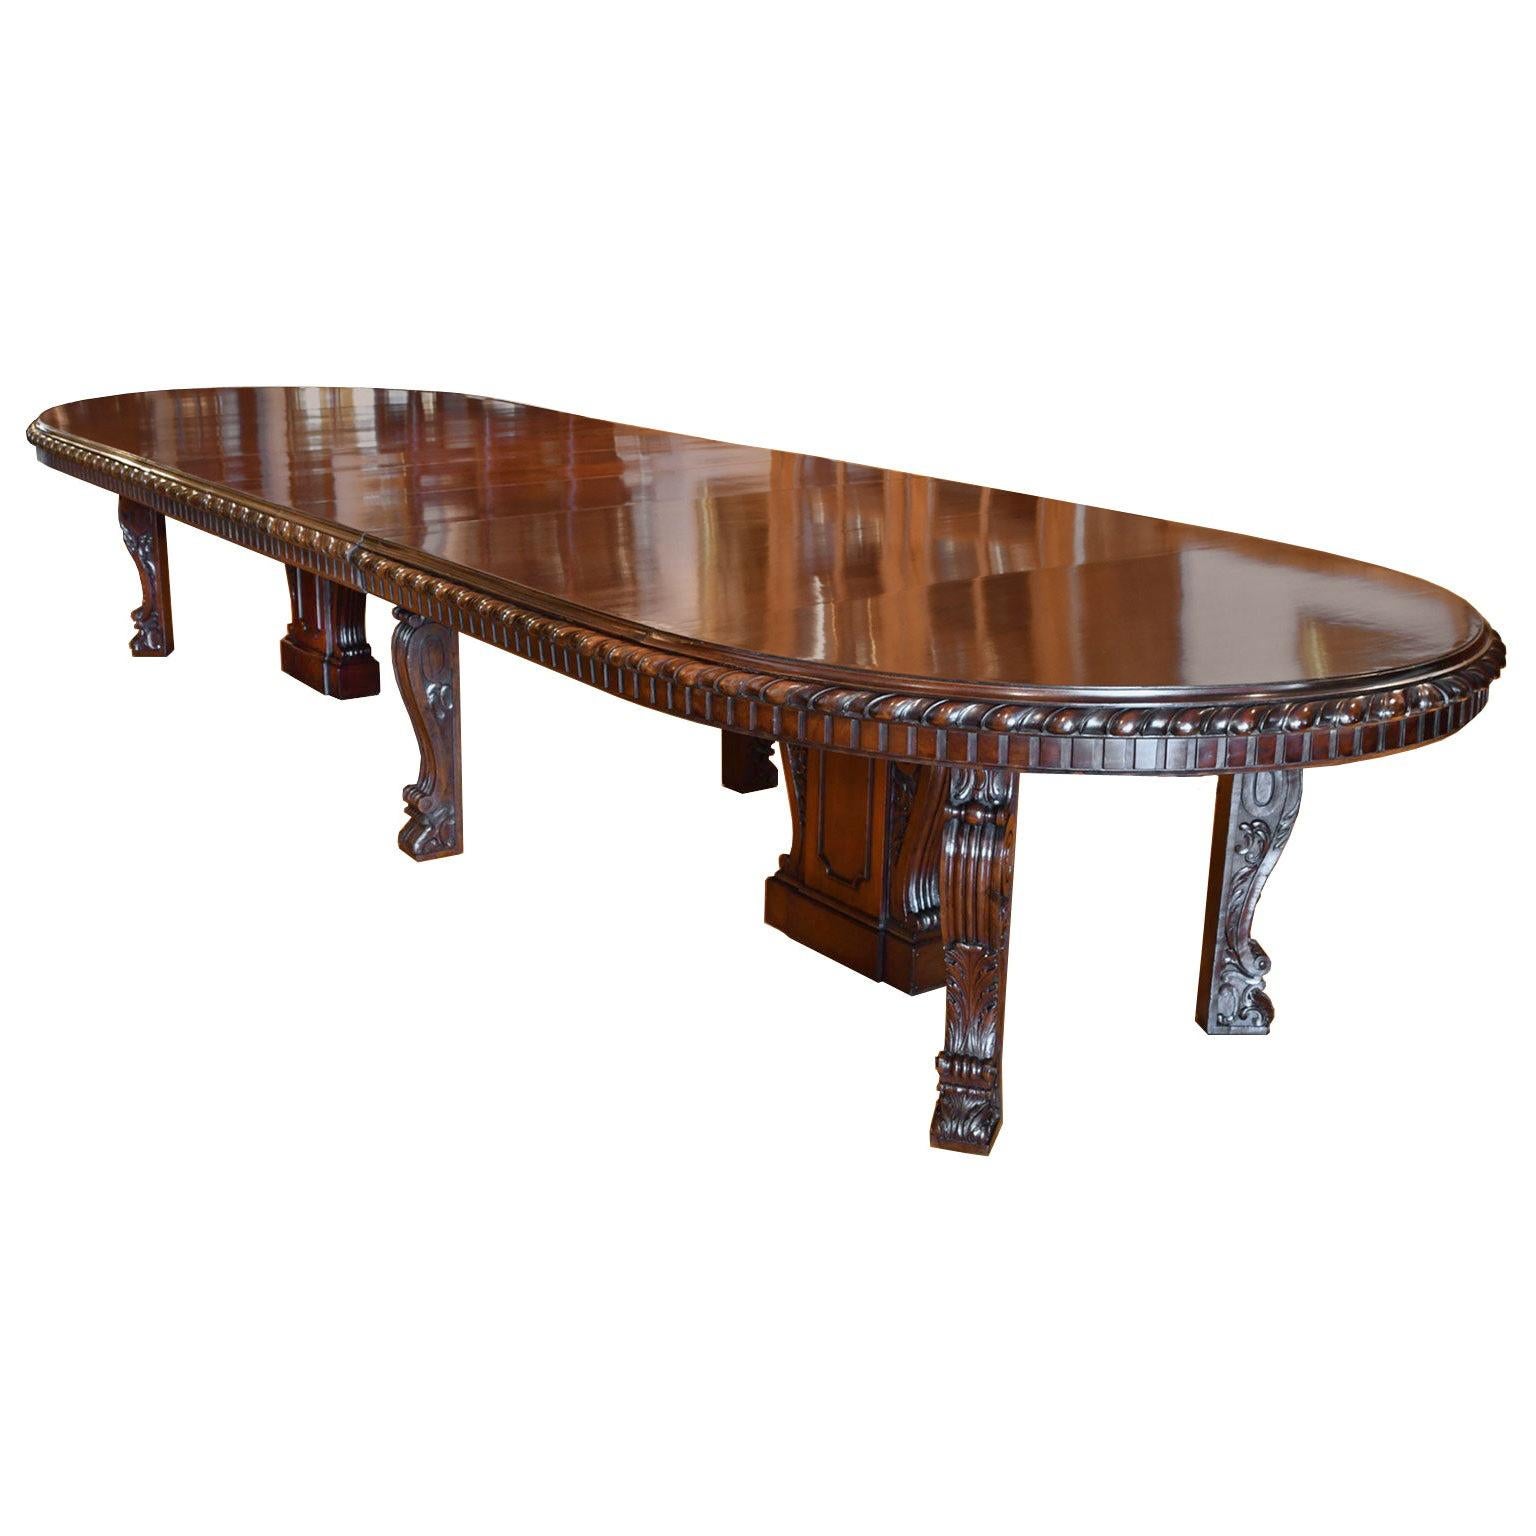 New York Gilded Age 12'-20' Long Extension Dining Table in West Indies Mahogany